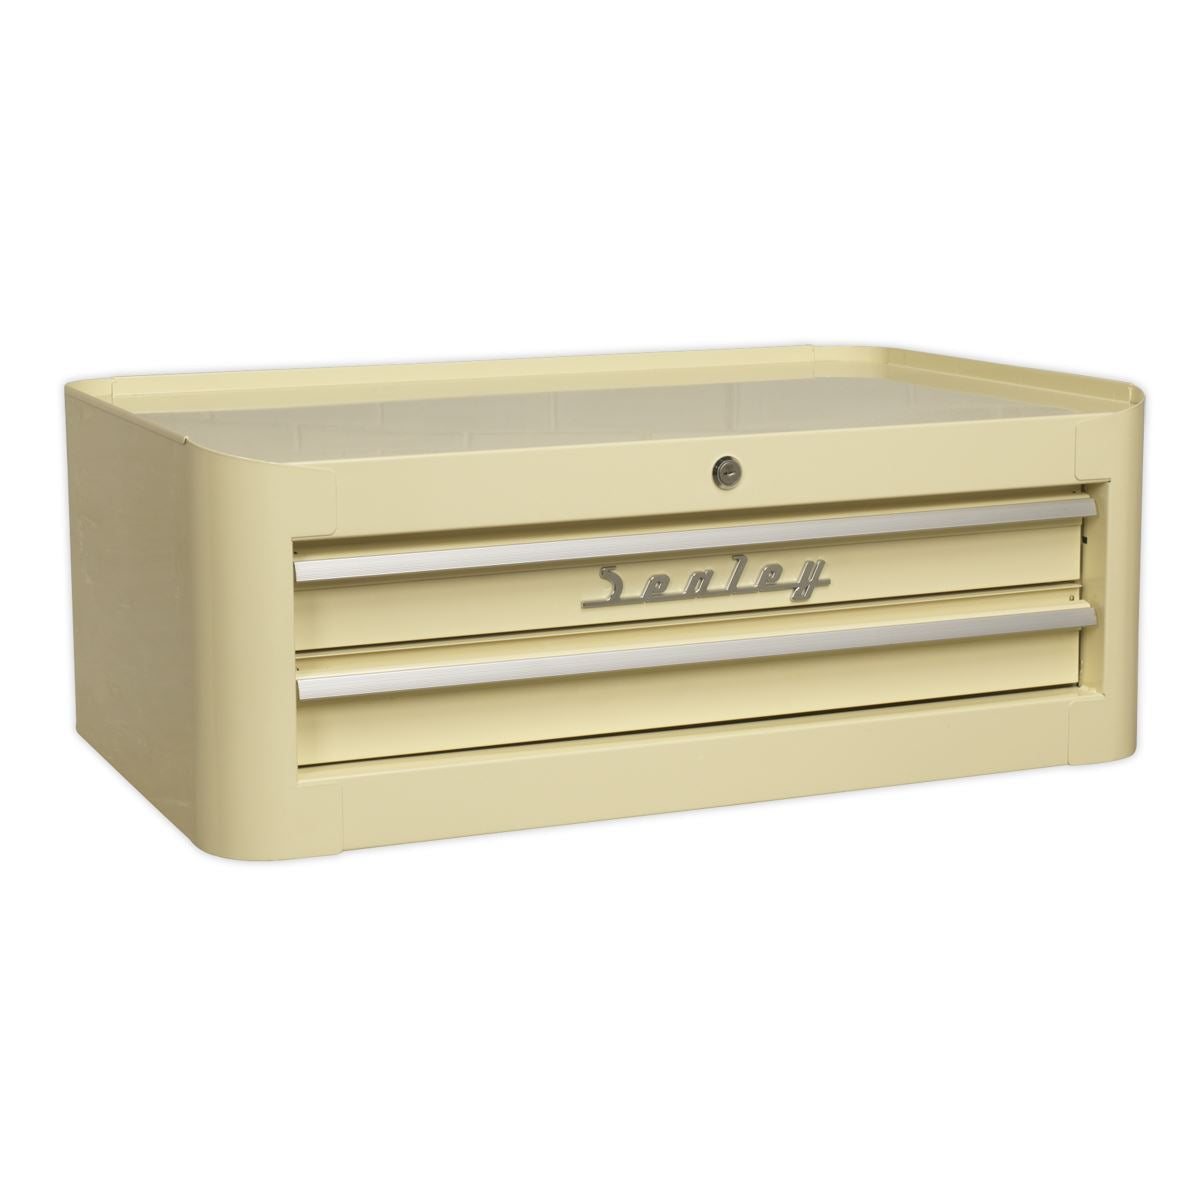 Sealey Premier Mid-Box Tool Chest 2 Drawer Retro Style